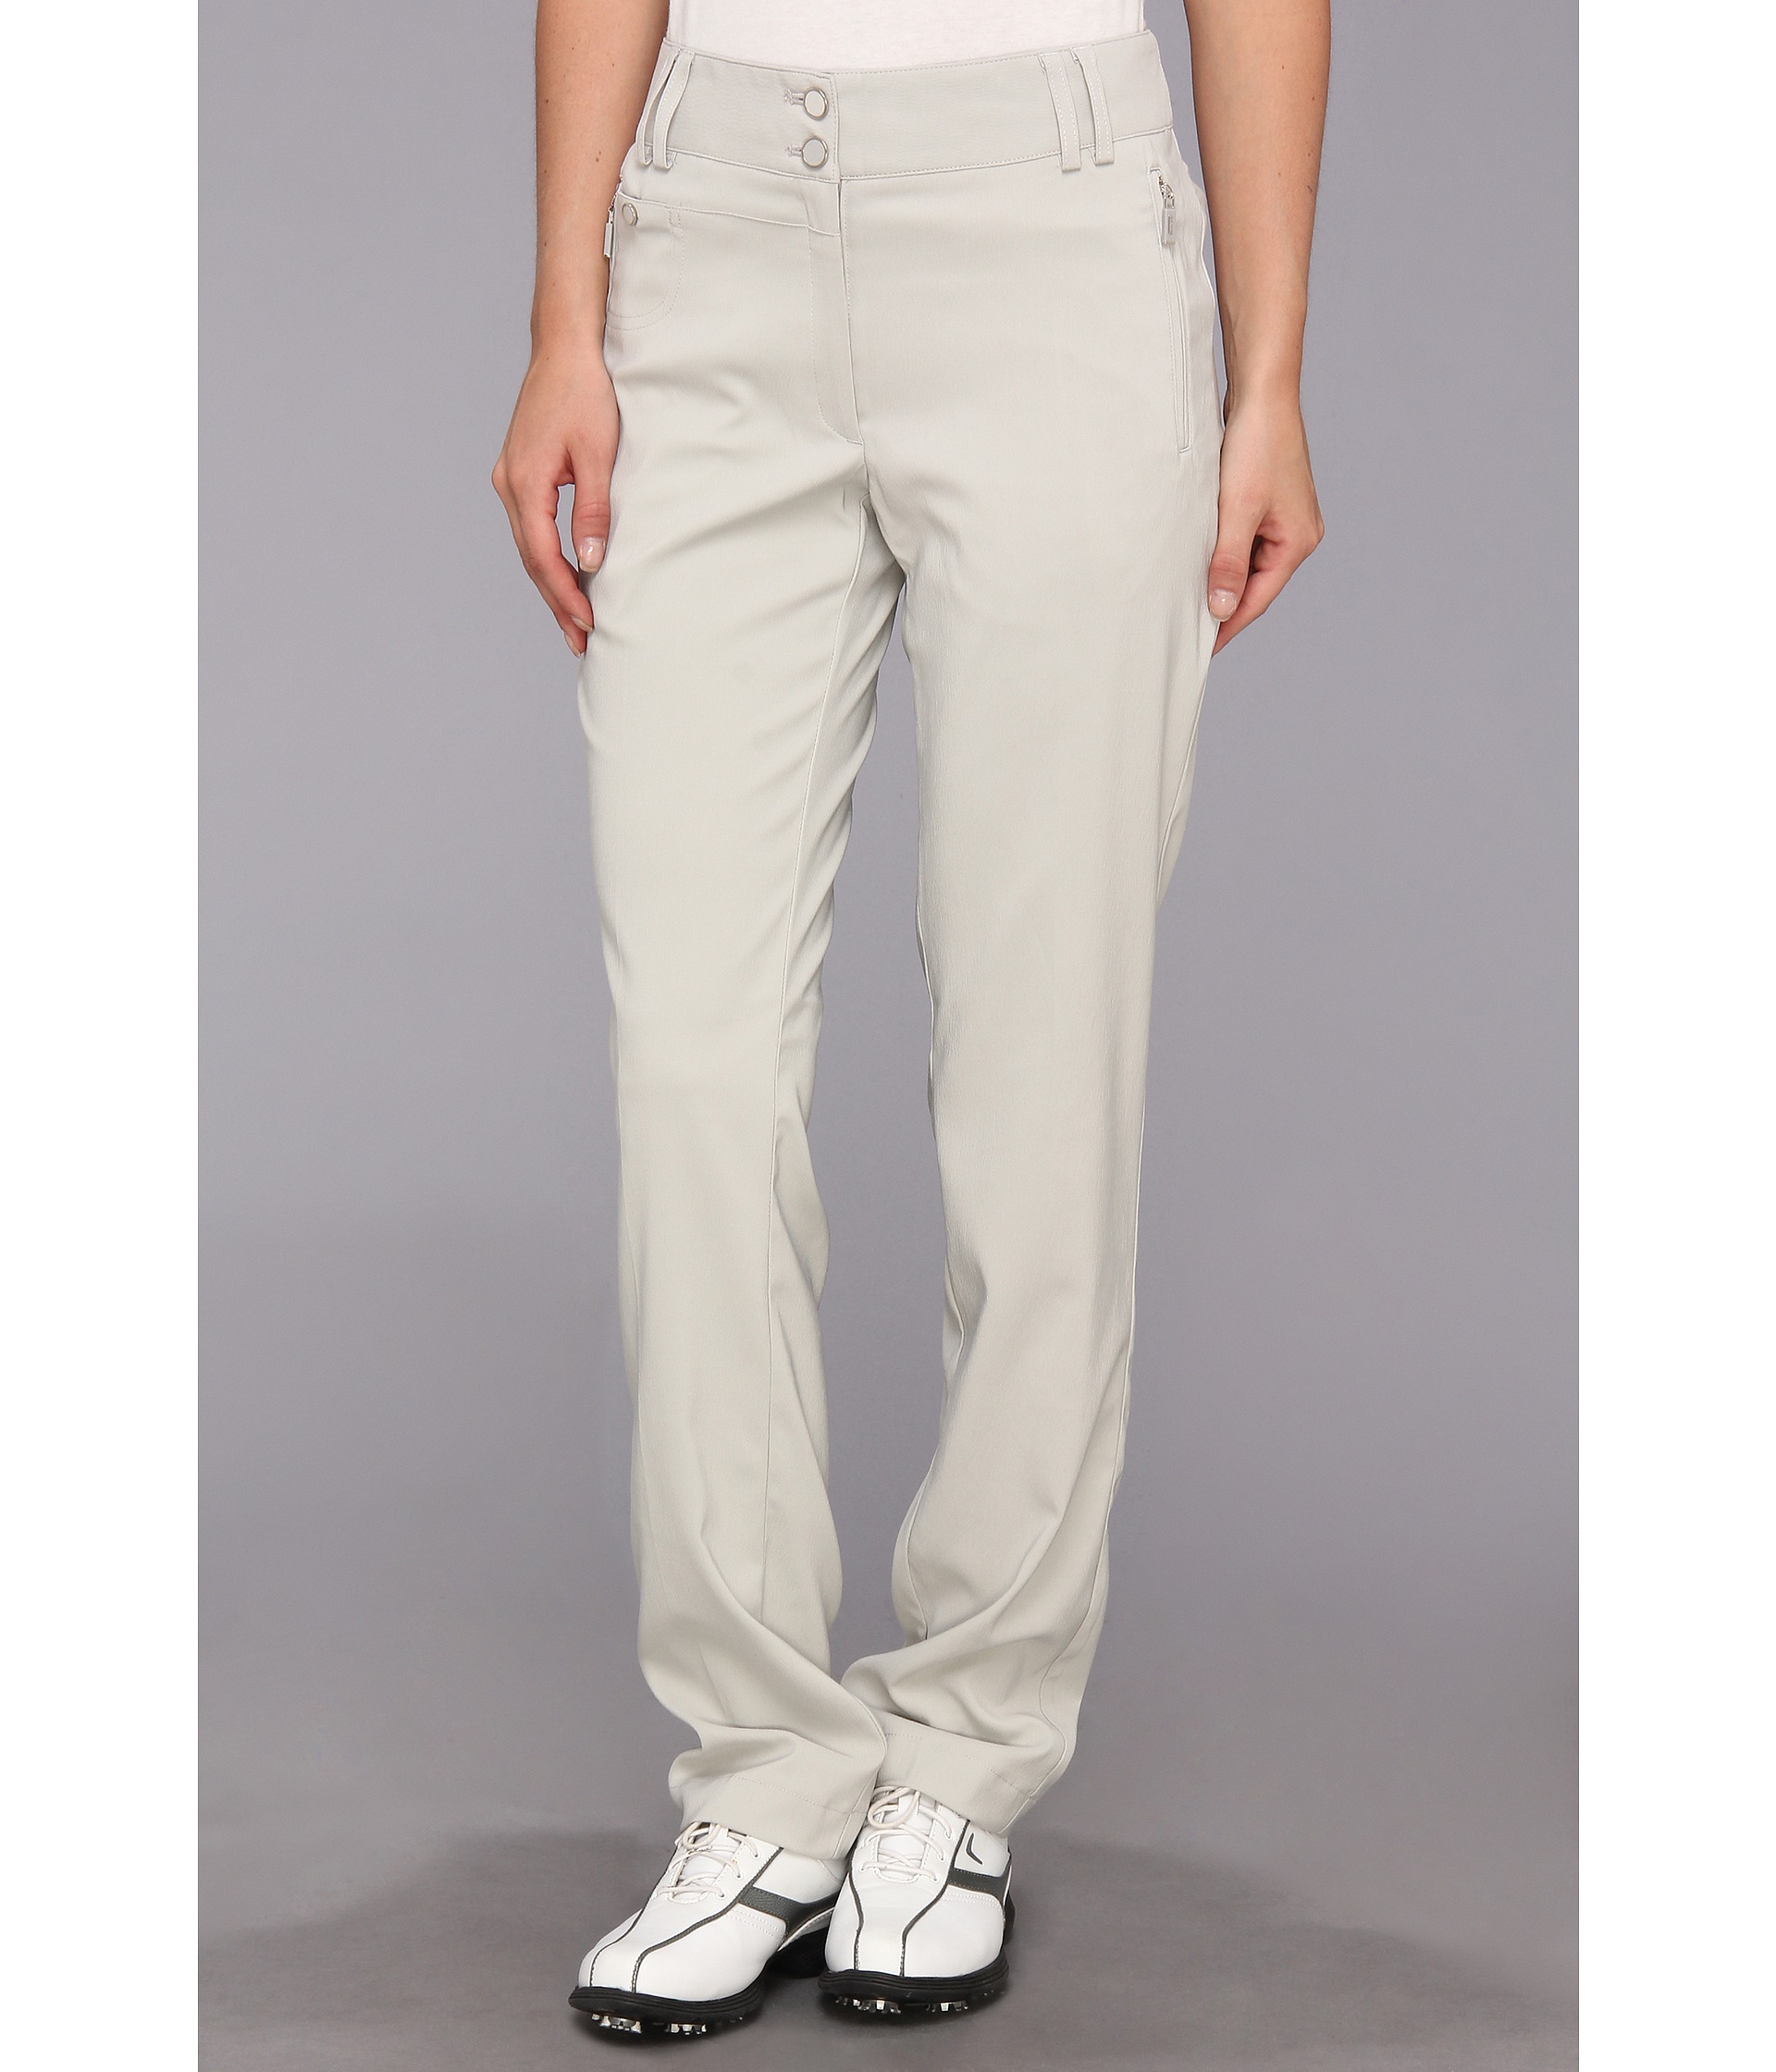 DKNY Golf Alexis 42in. Pant Chateau